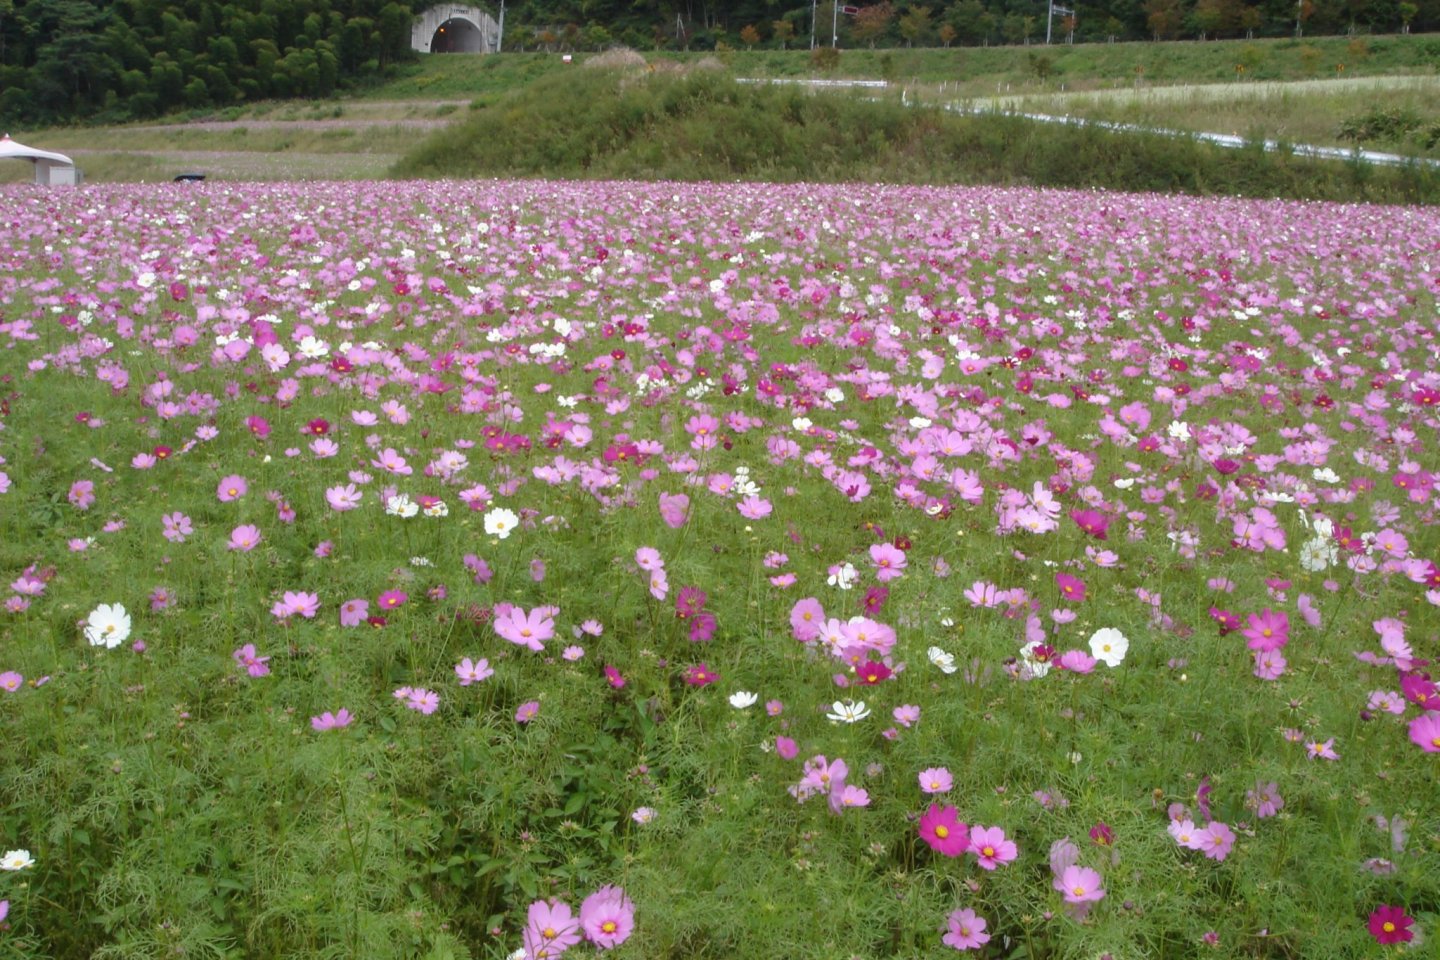 Iinan Town in Shimane is home to hundreds of thousands of cosmos in autumn